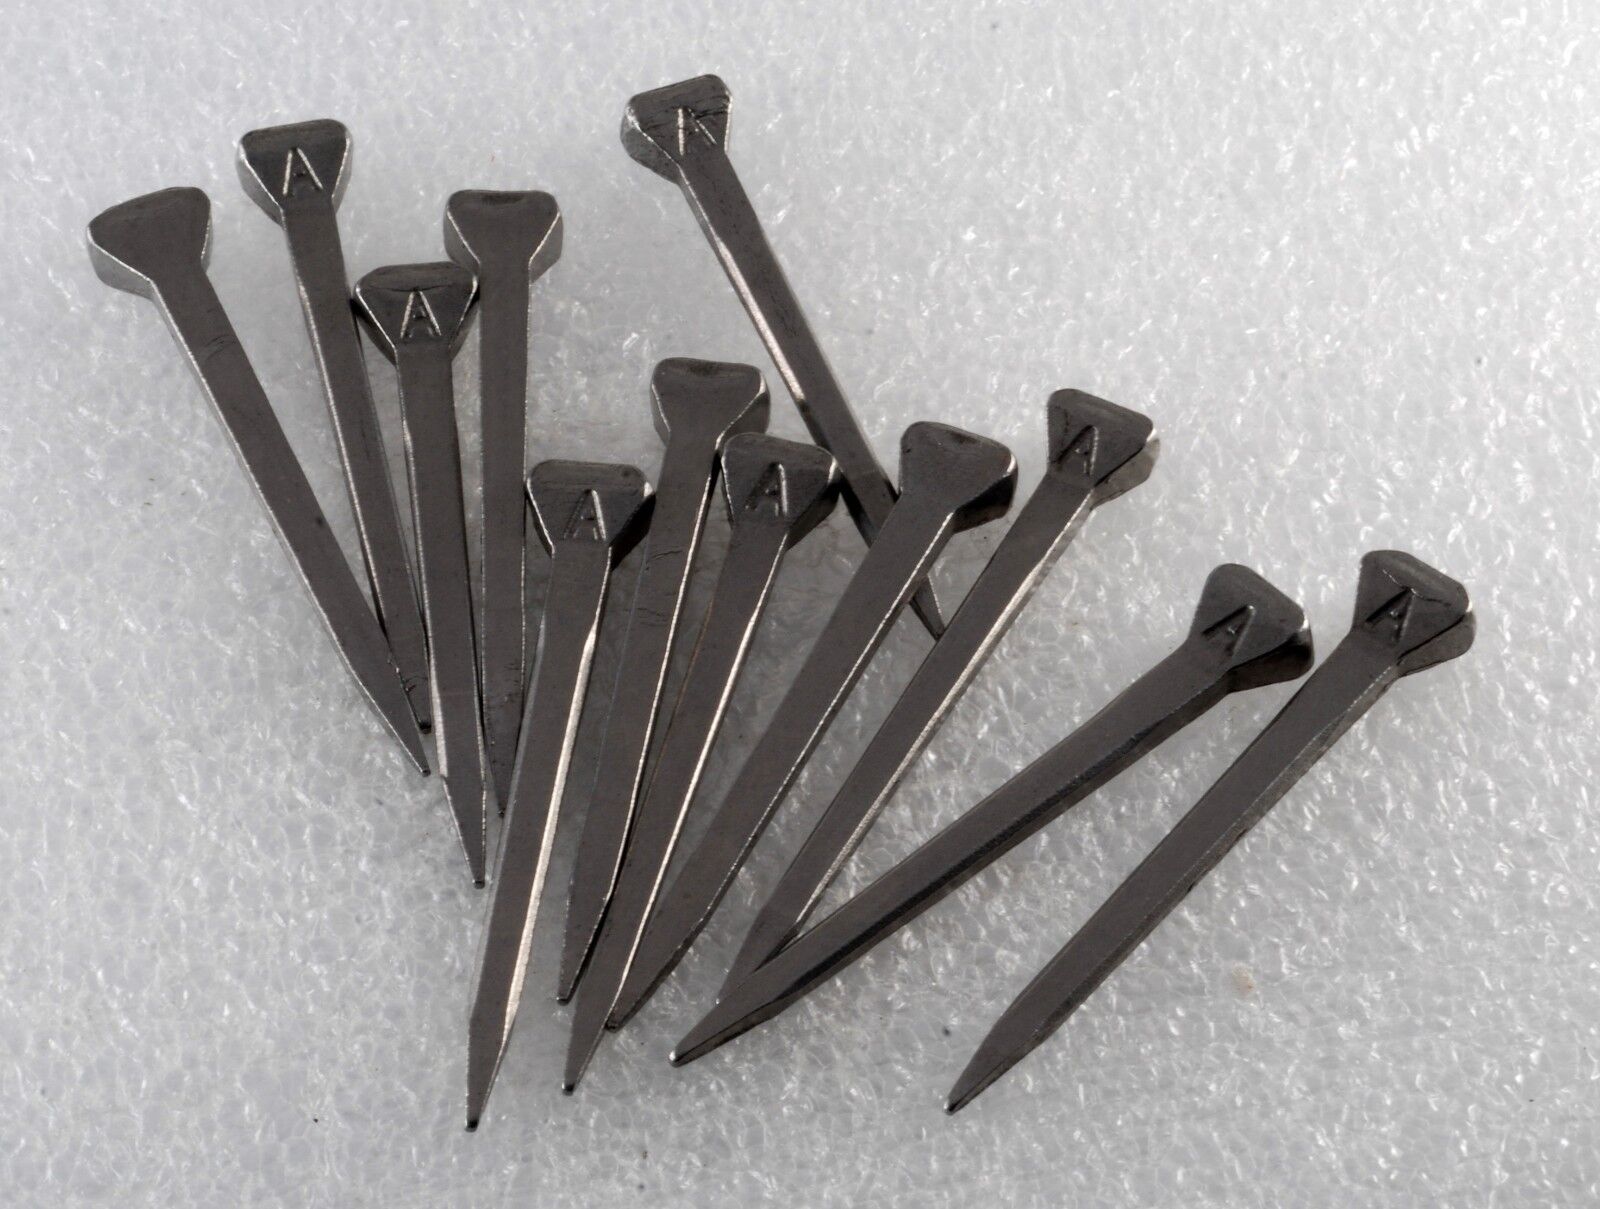 12 NEW HORSE SHOE  FLAT BACK COFFIN NAILS  METAL WORKS RING MAKING SPELLS GLASS